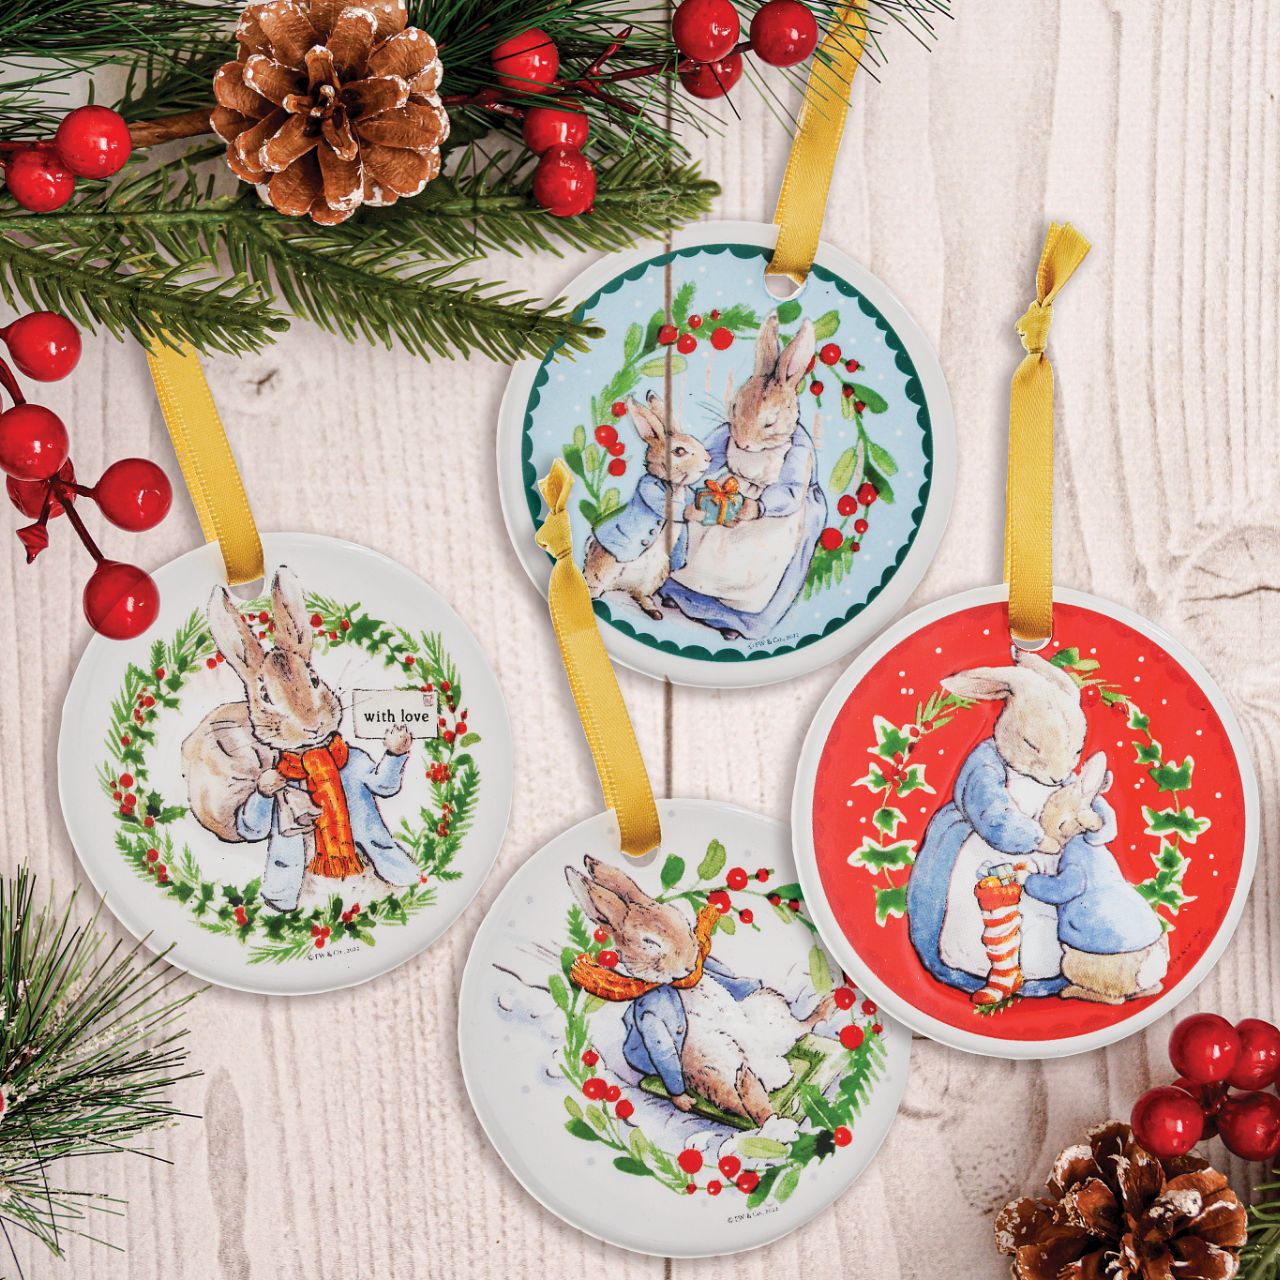 Beatrix Potter Peter Rabbit Ceramic Hanging Ornaments Set of 4  Peter Rabbit Hanging Ornaments with gold ribbon will add the spirit of Christmas to any household. With four different images, all from the original Beatrix Potter illustrations and stories, these Peter Rabbit Hanging Ornaments are extra special. Coming in a branded gift box, these make a great gift or self purchase.